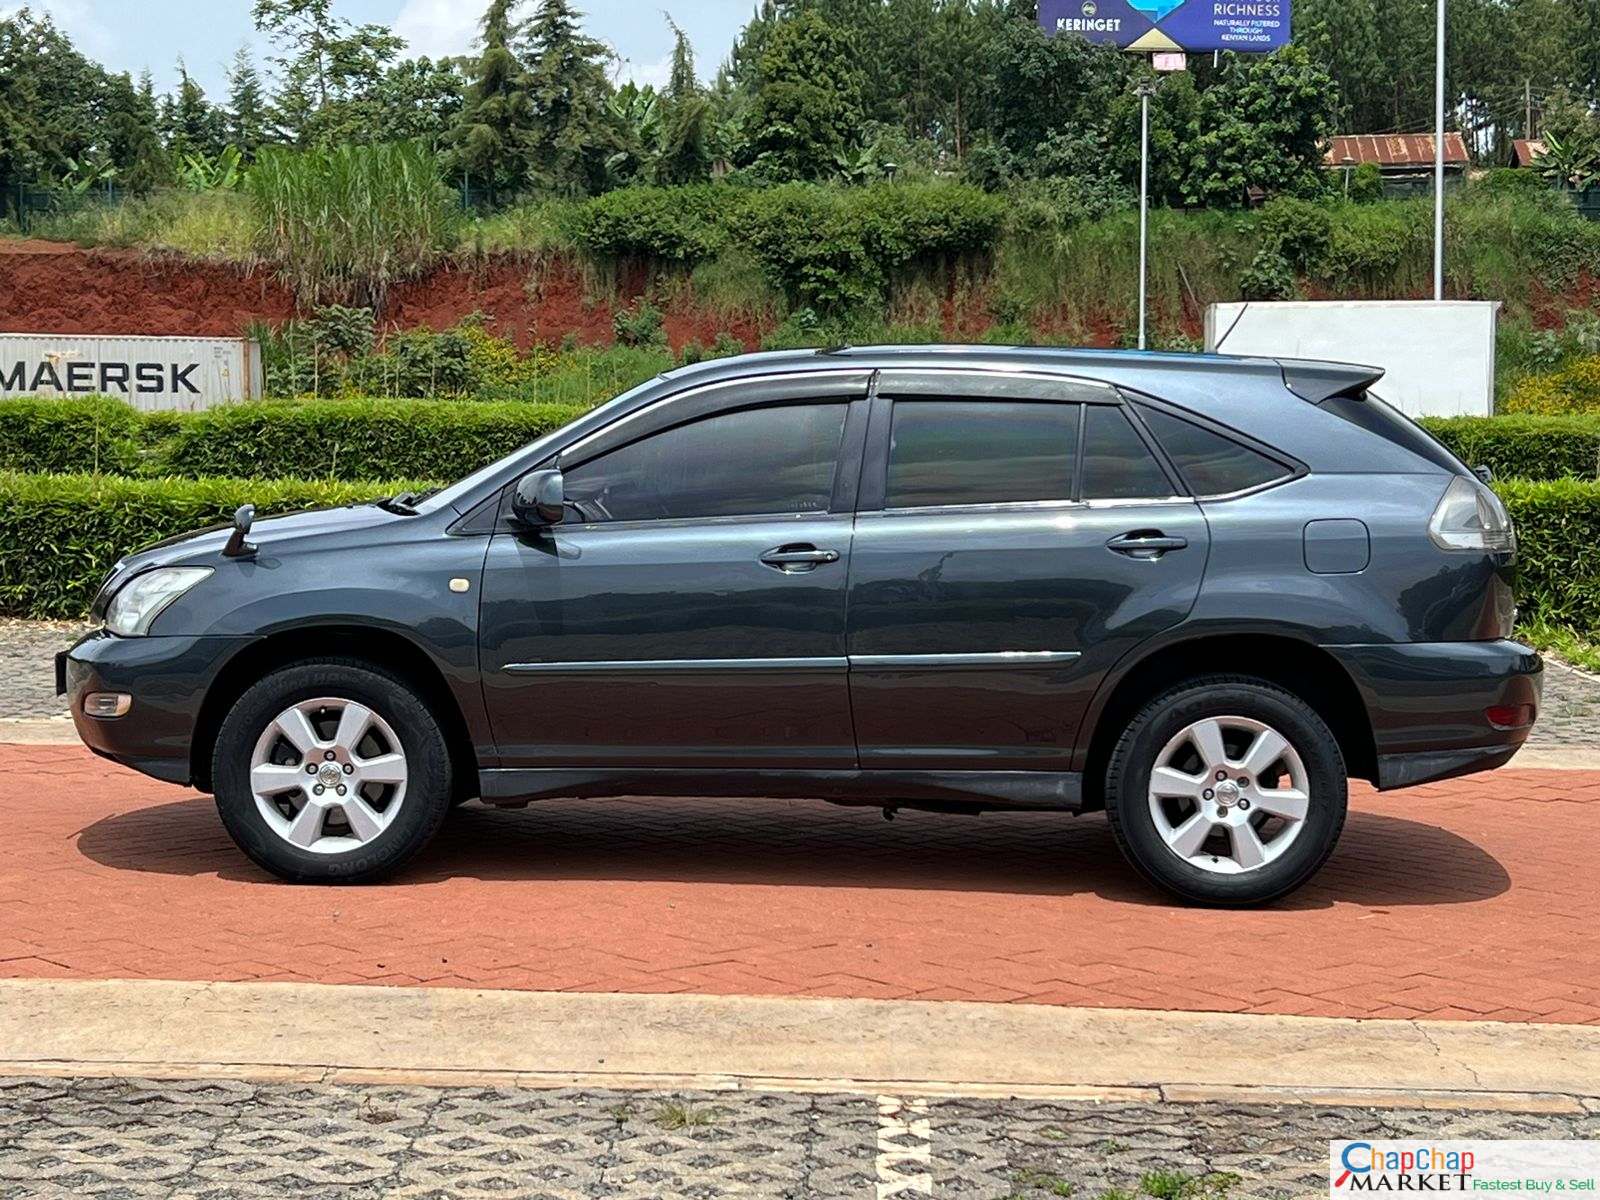 Toyota Harrier CHEAPEST cleanest You Pay 30% Deposit Trade in OK EXCLUSIVE  hire purchase installments (SOLD)